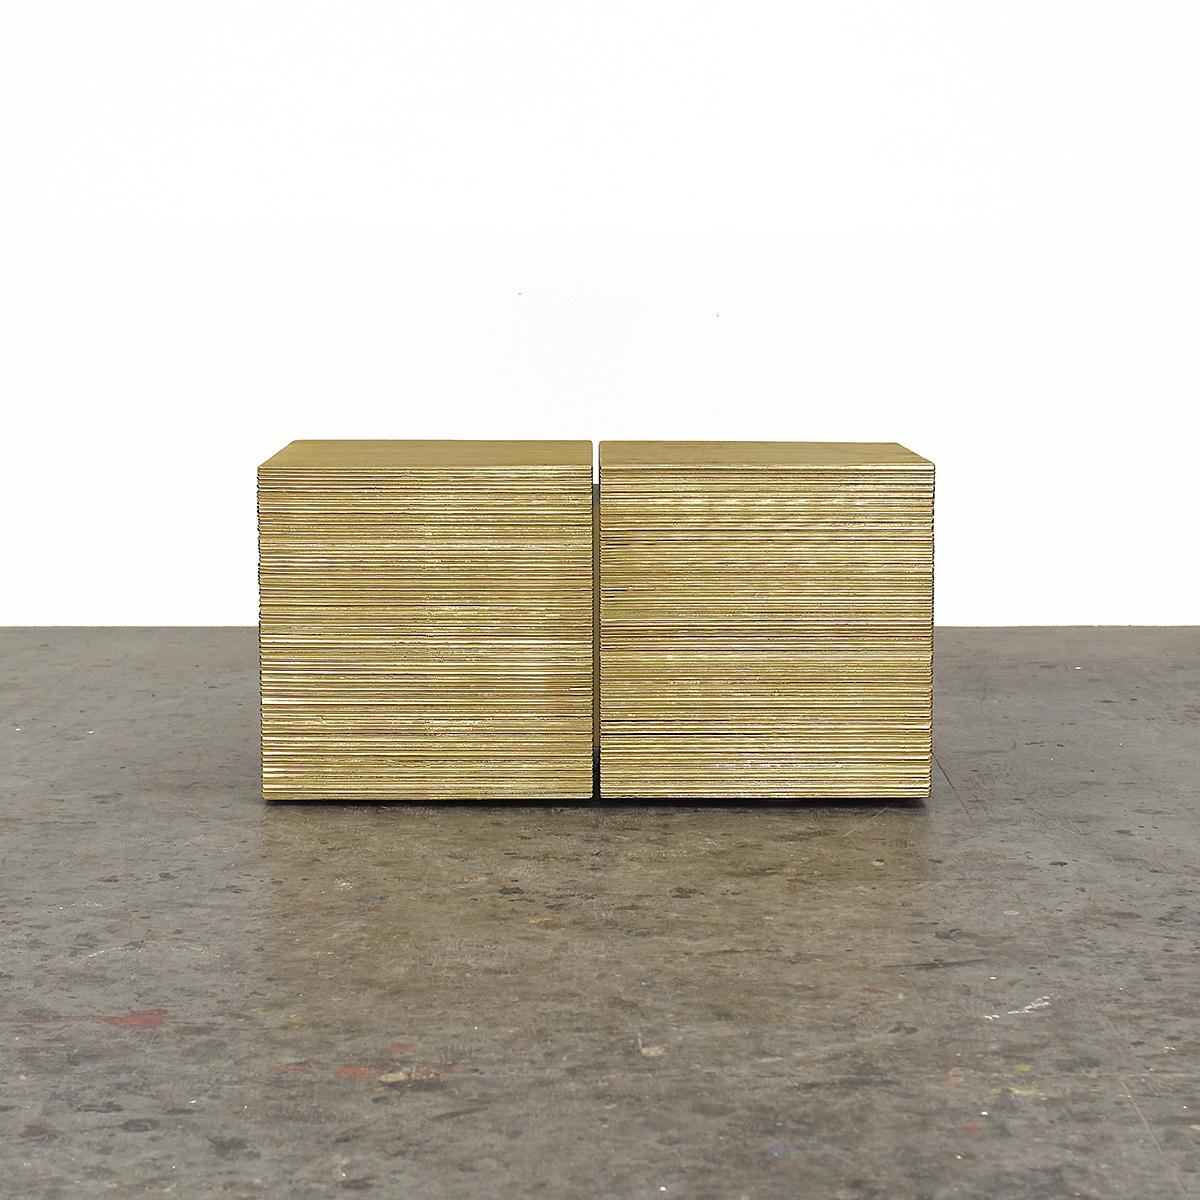 ORO - OS3 bench by John Eric Byers
ORO collection
Dimensions: W 76 x D 38 x H 38 cm
Materials: maple hardwood + gold metallic lacquer 

Hand shaped + hand textured + hollow core stacked lamination

John Eric Byers creates geometrically